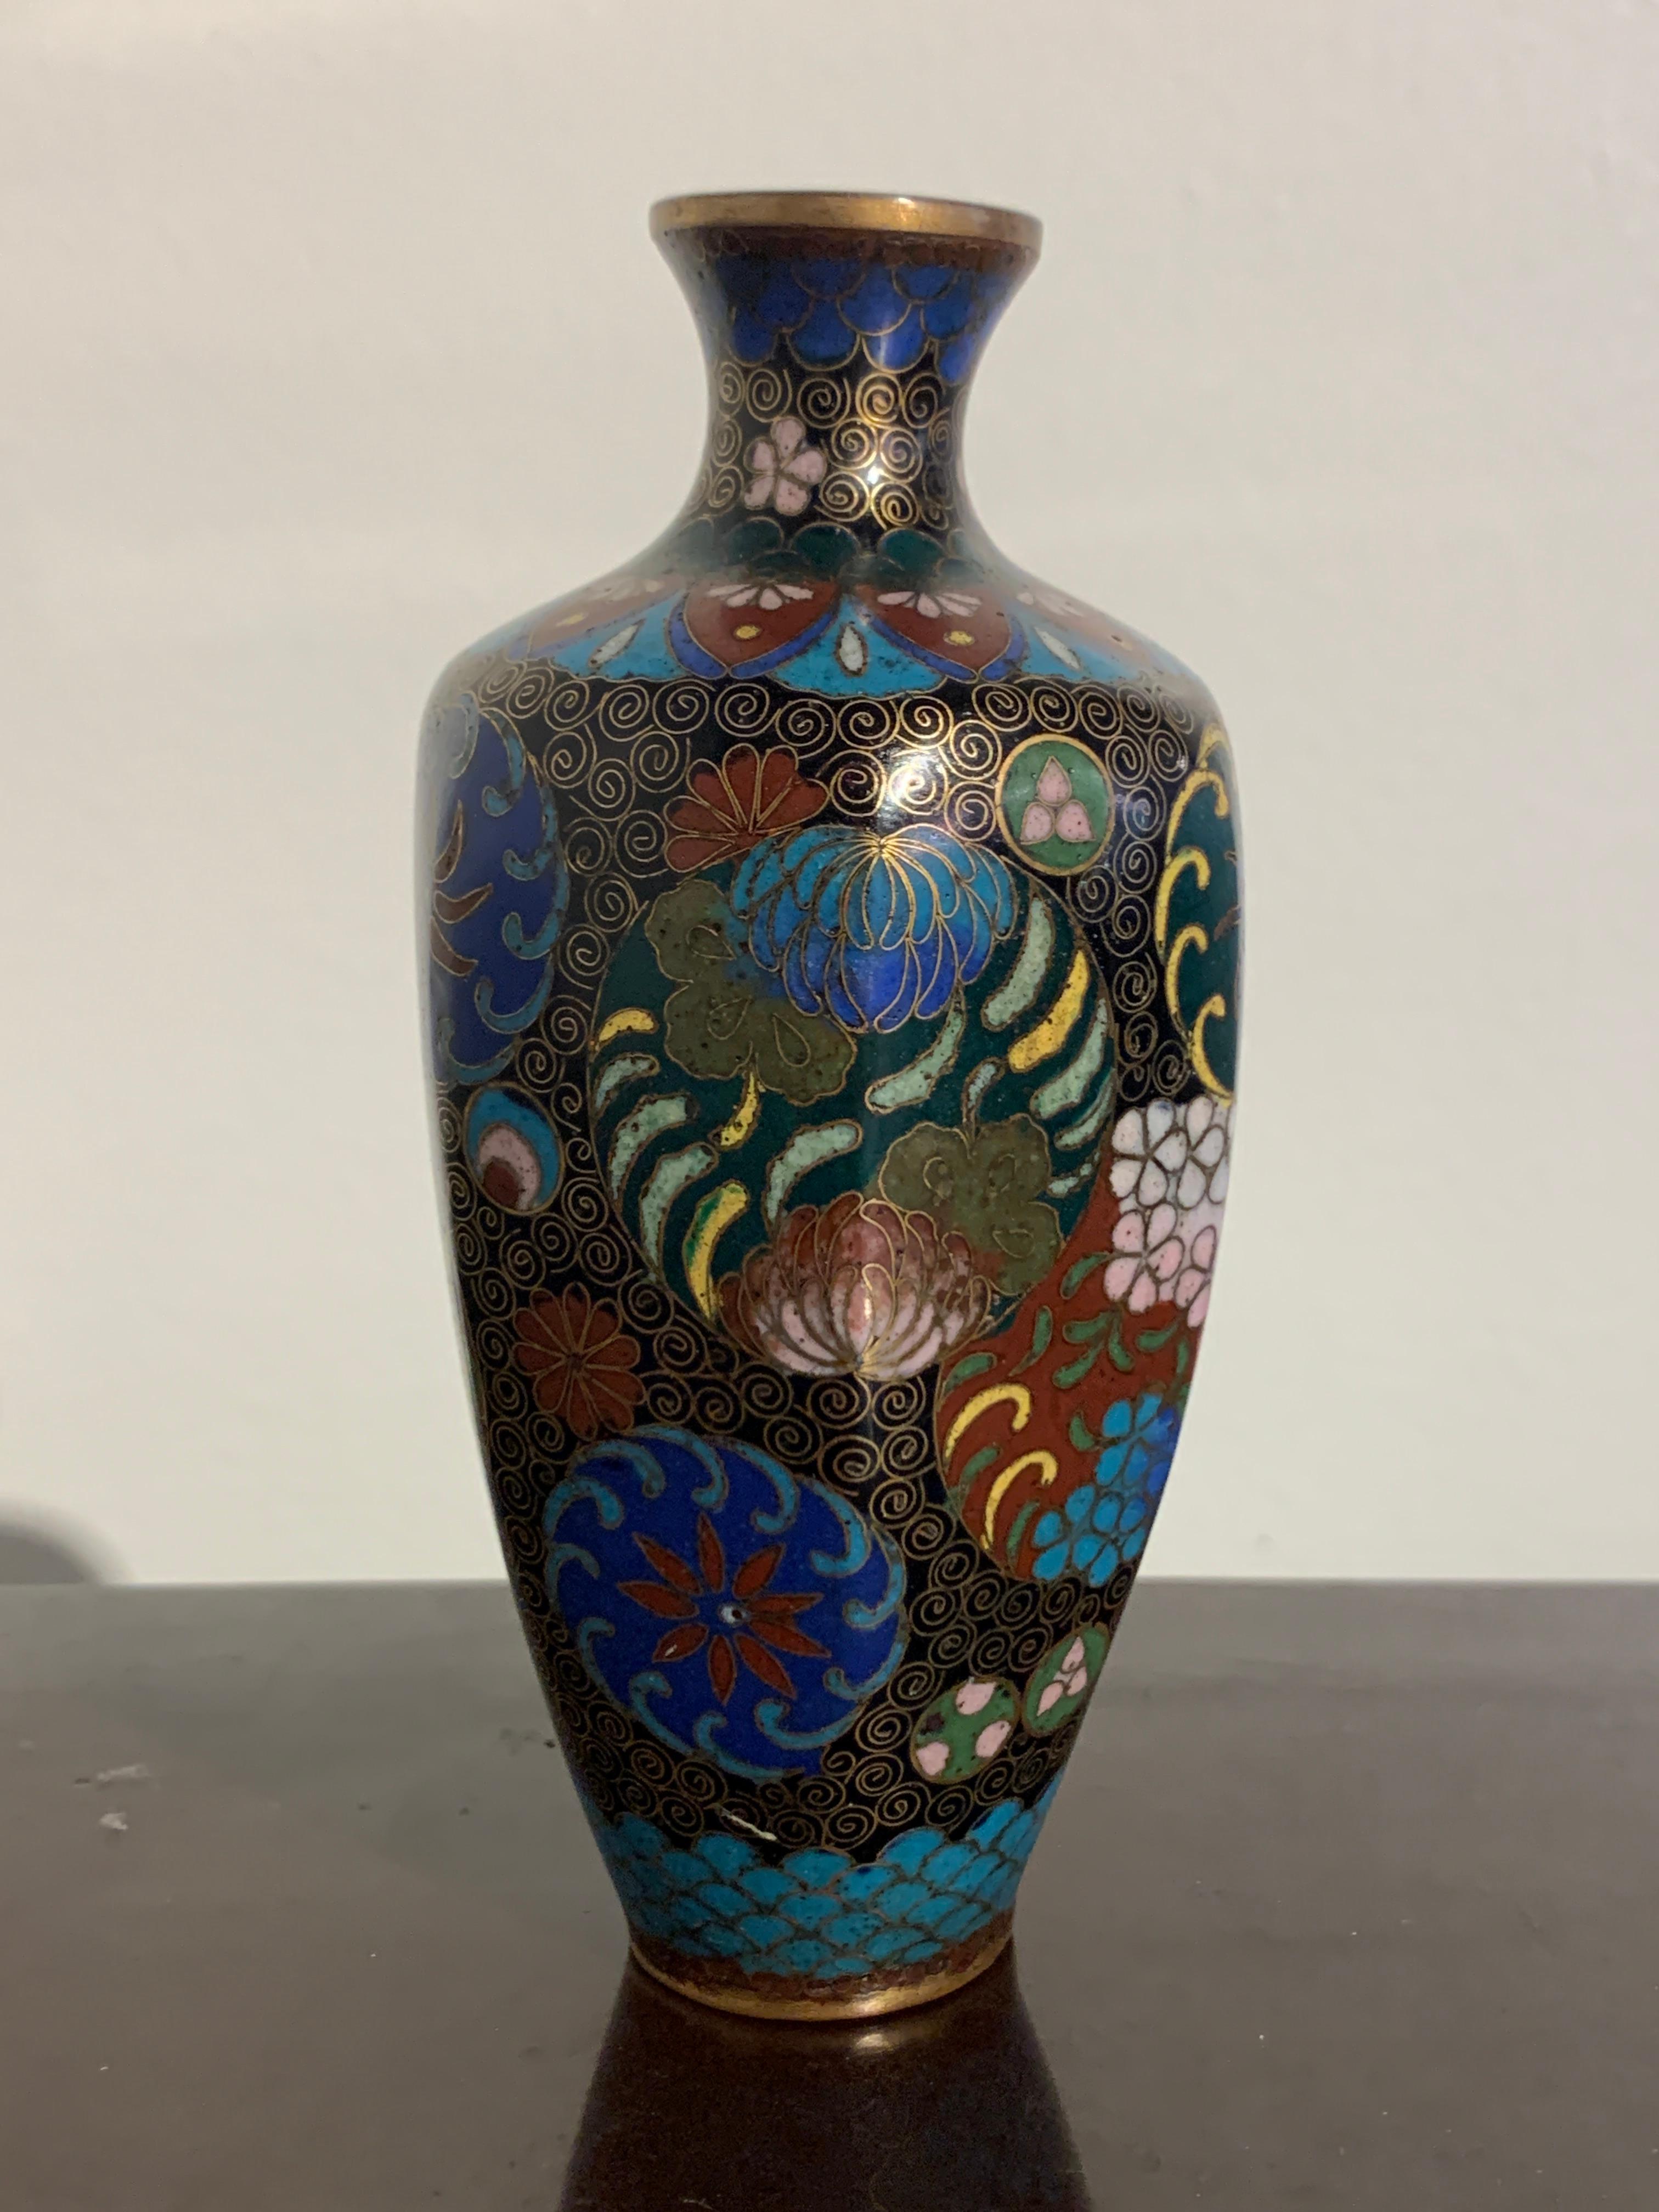 A fine and diminutive Japanese black ground cloisonné vase, Meiji period, late 19th century.

The small vase with six faceted sides. The black ground body of the vase decorated with various roundels, including four large ones depicting flowers